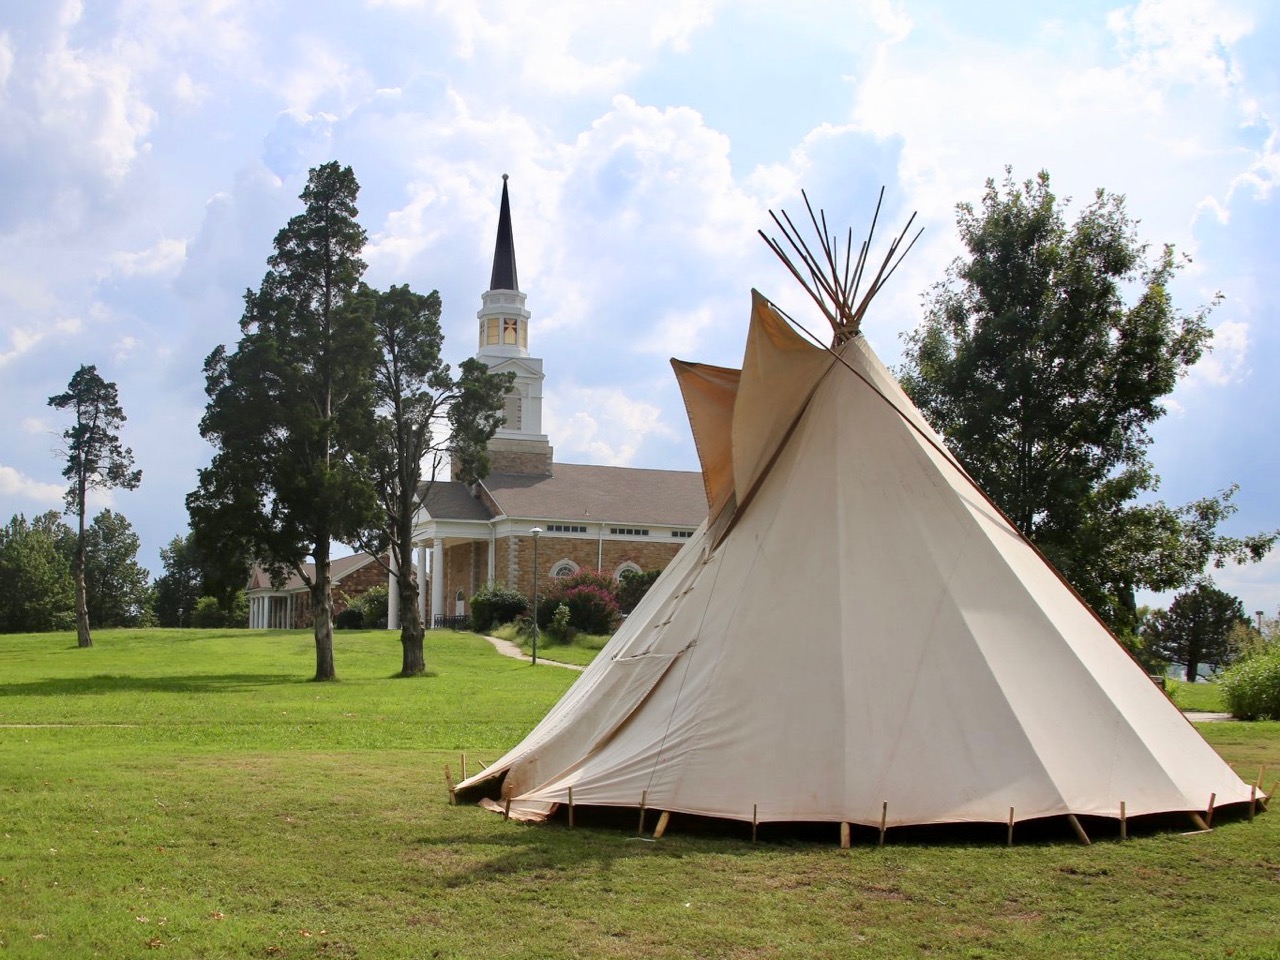 Historic Indian college secures charter from Otoe-Missouria Tribe